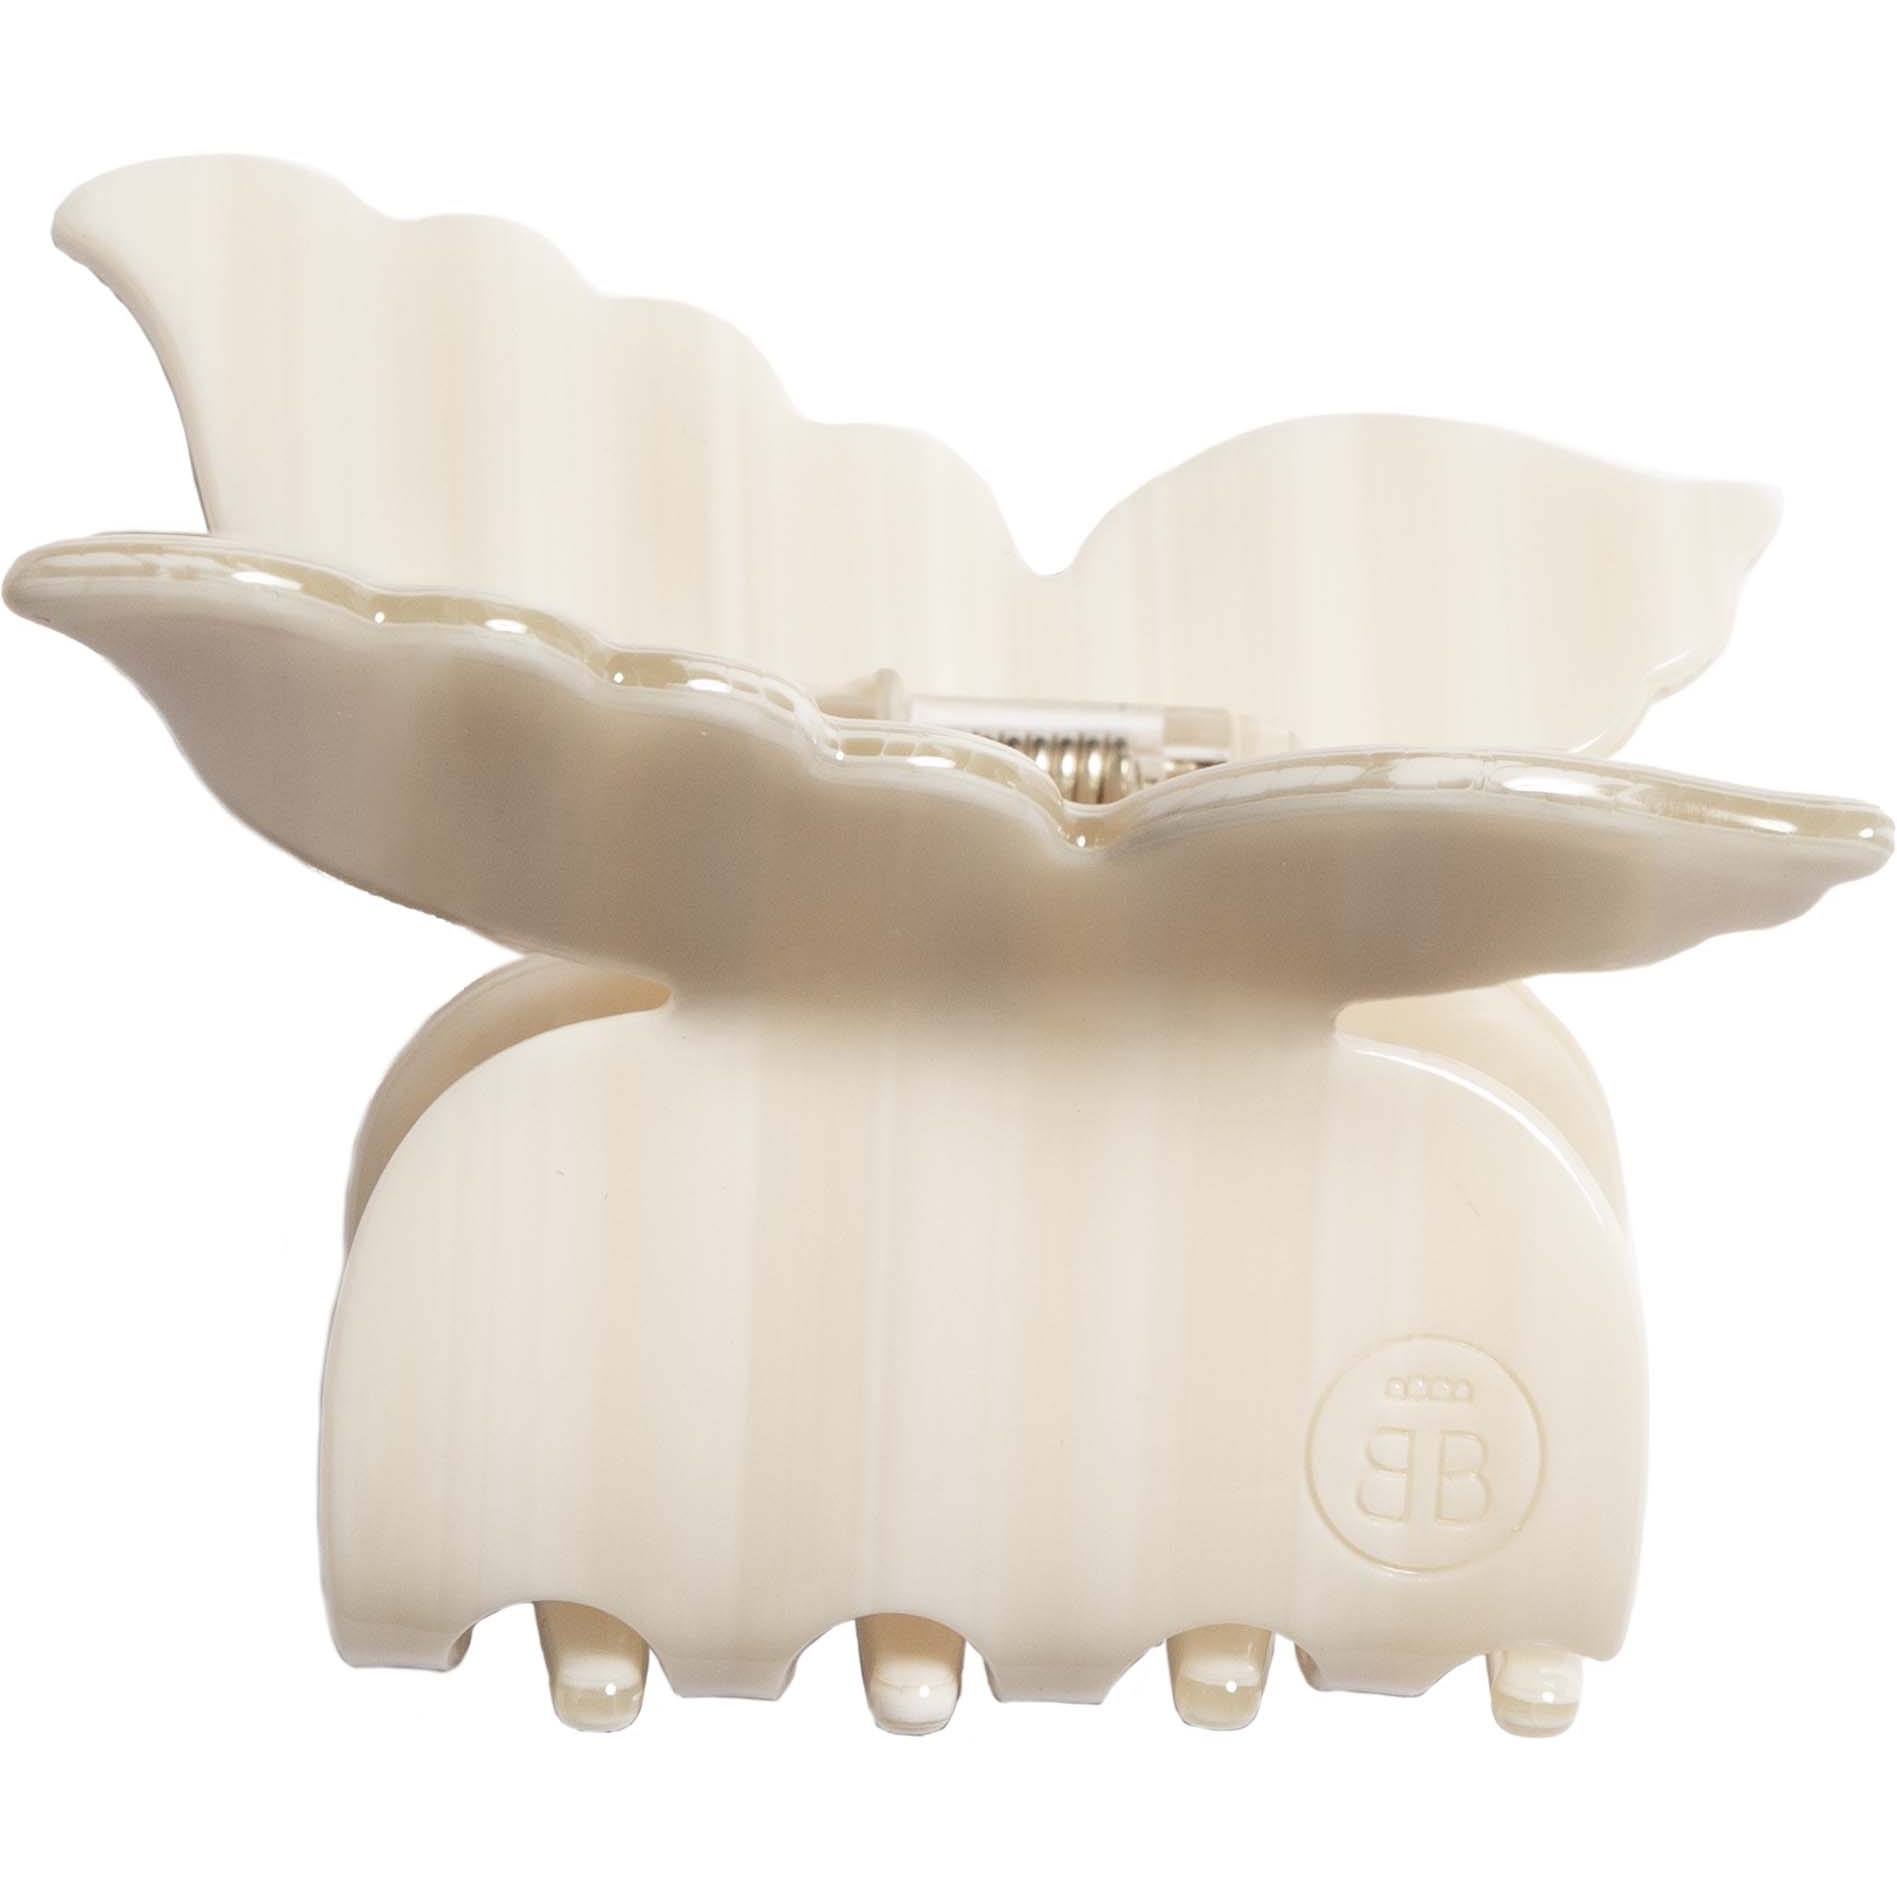 ByBarb Butterfly hair claw White